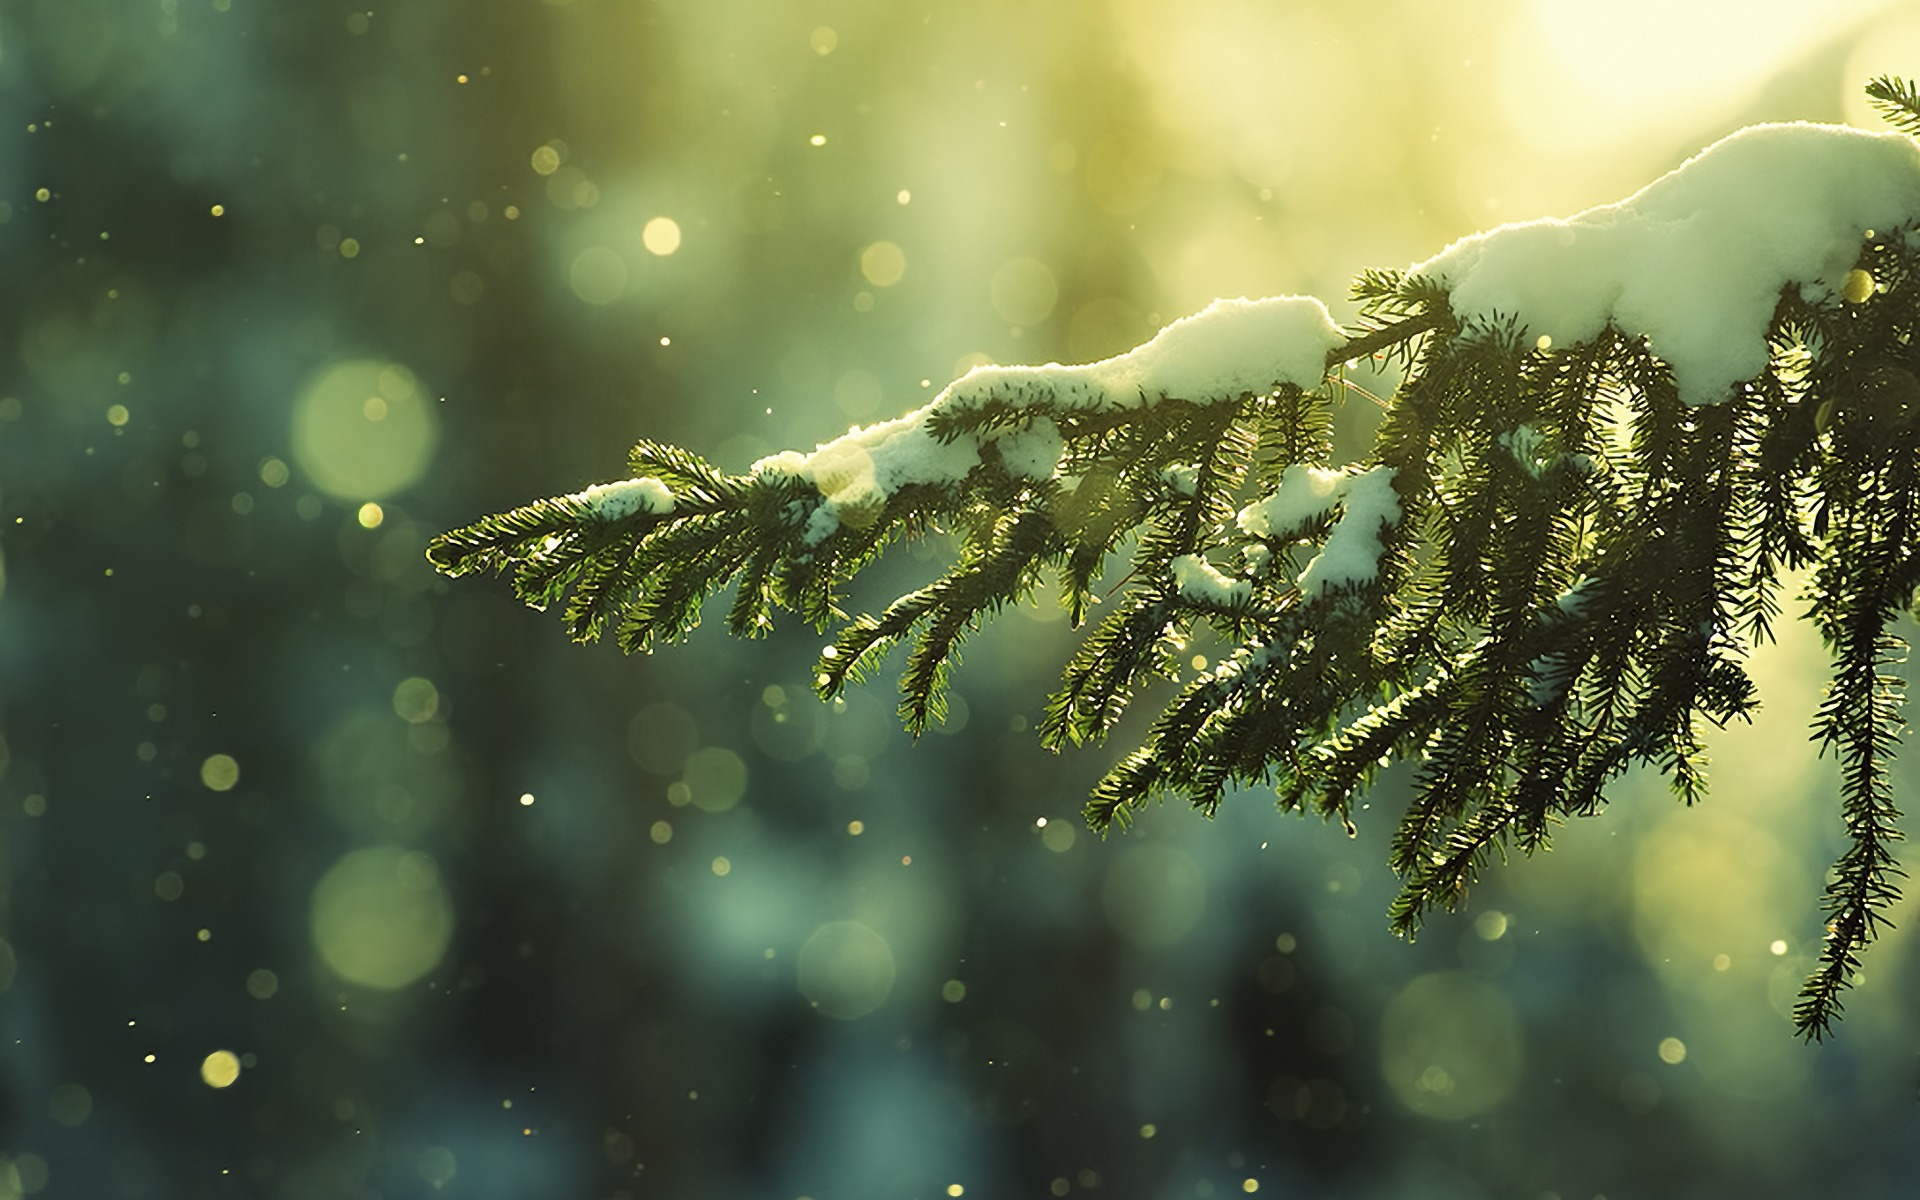 1920x1200 2900+ Winter HD Wallpapers and Backgrounds